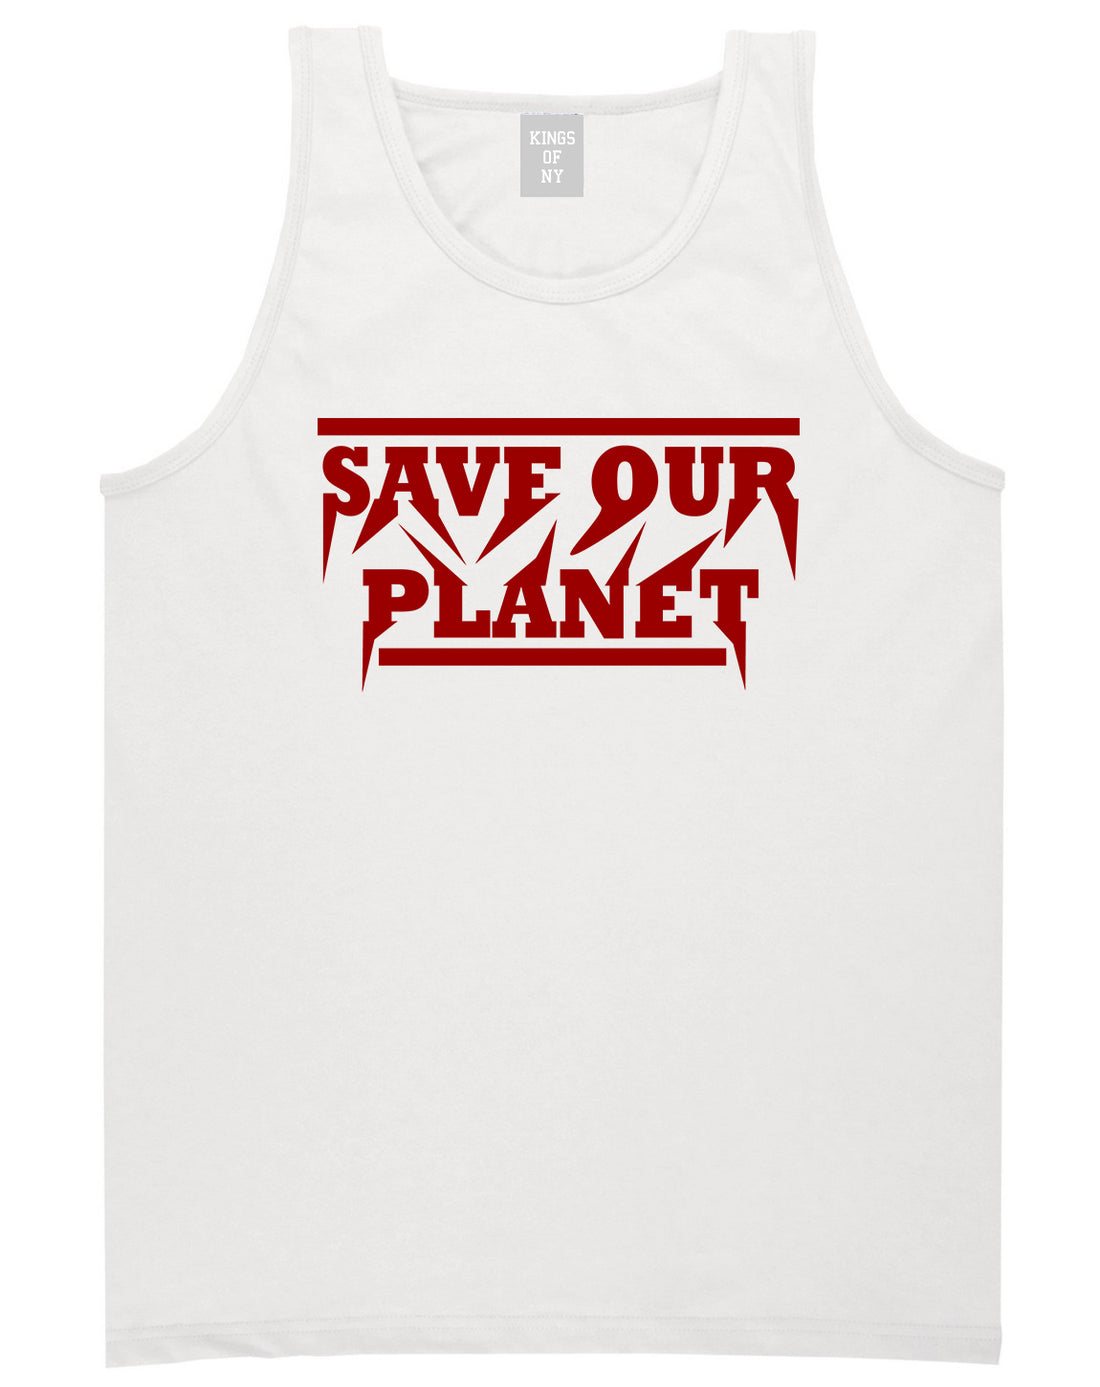 Save Our Planet Mens Tank Top Shirt White